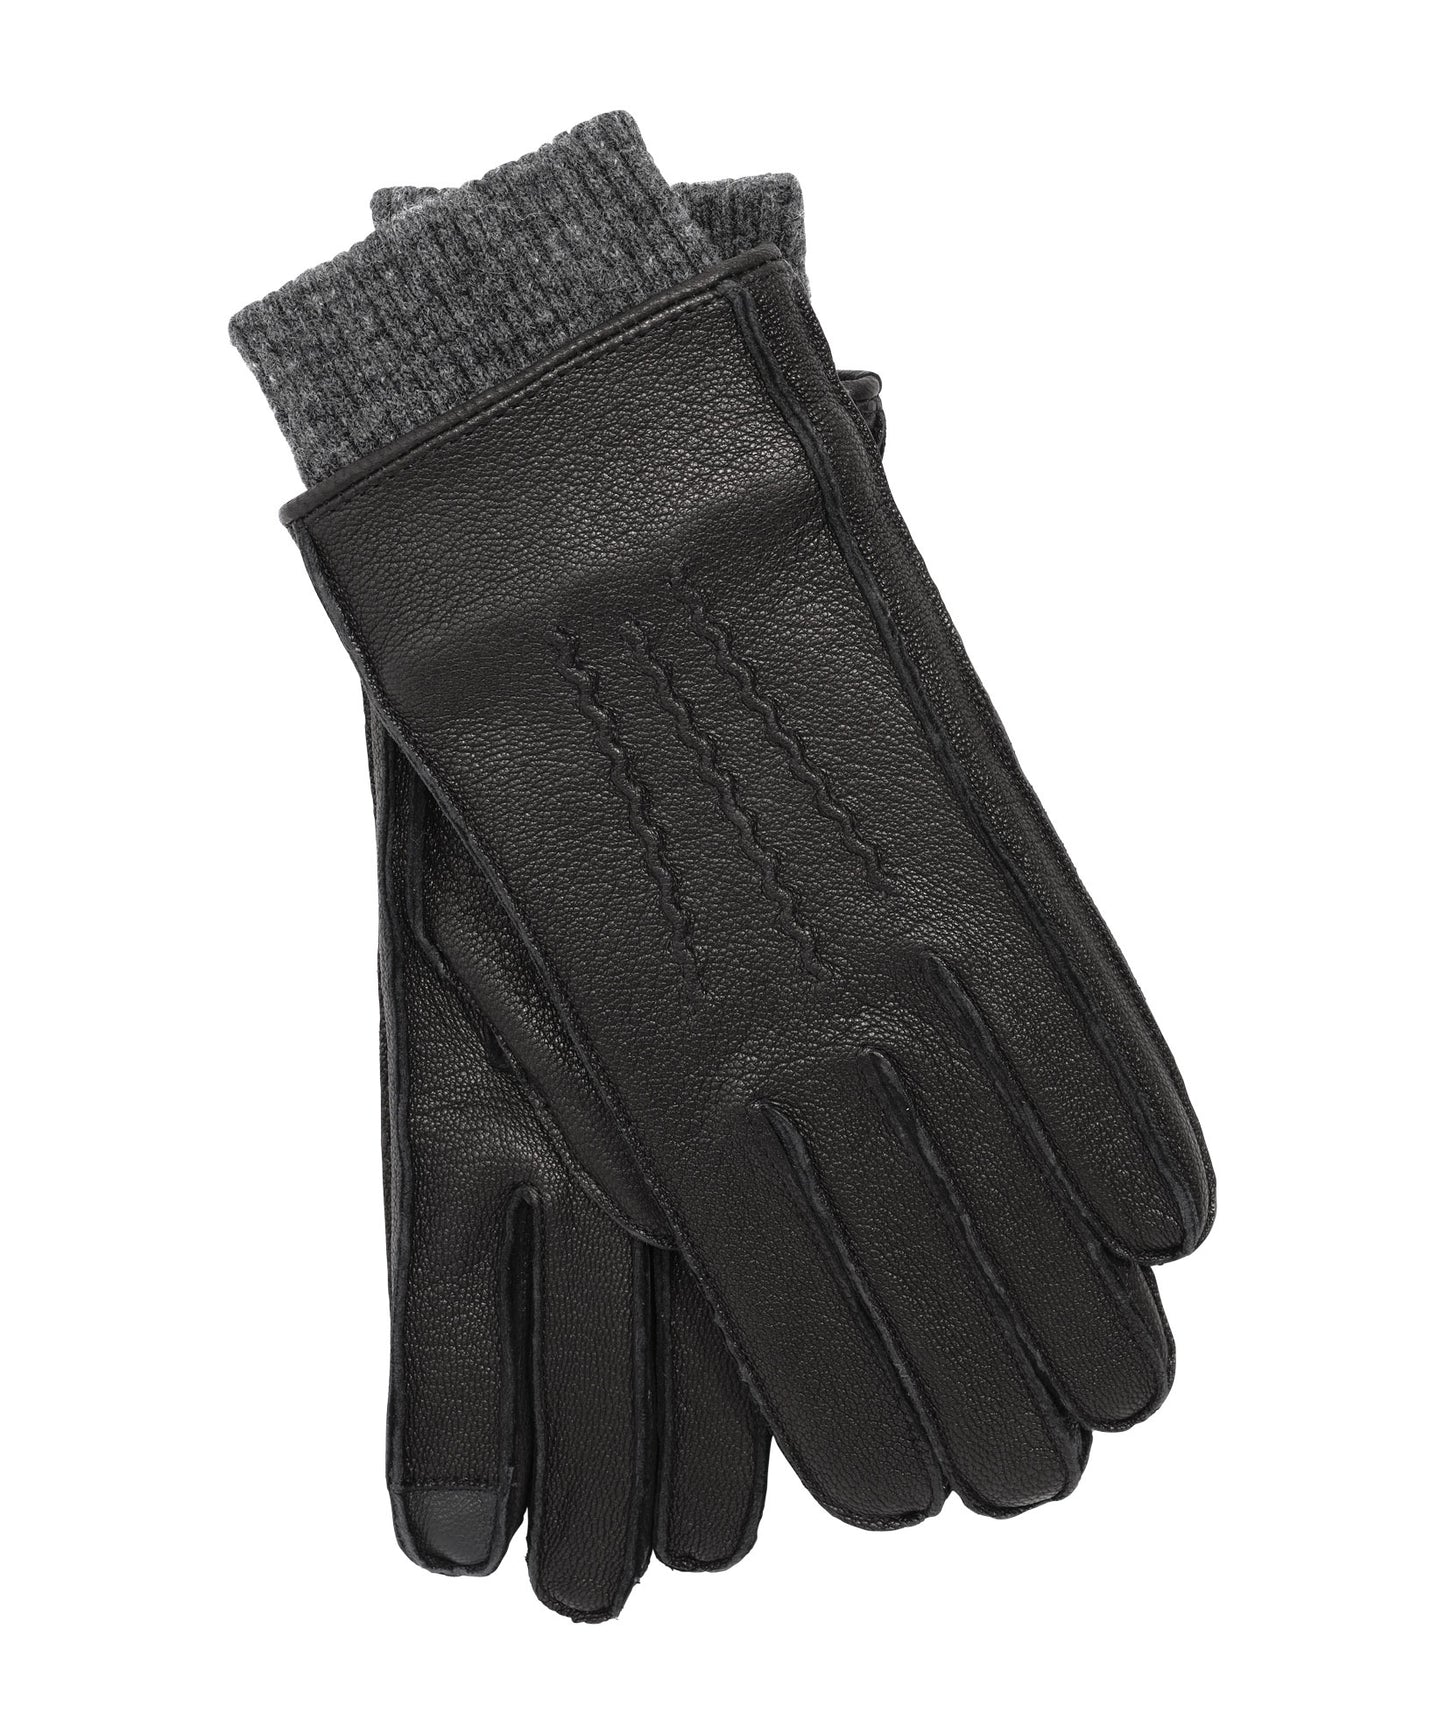 Leather Glove with Knit Cuff